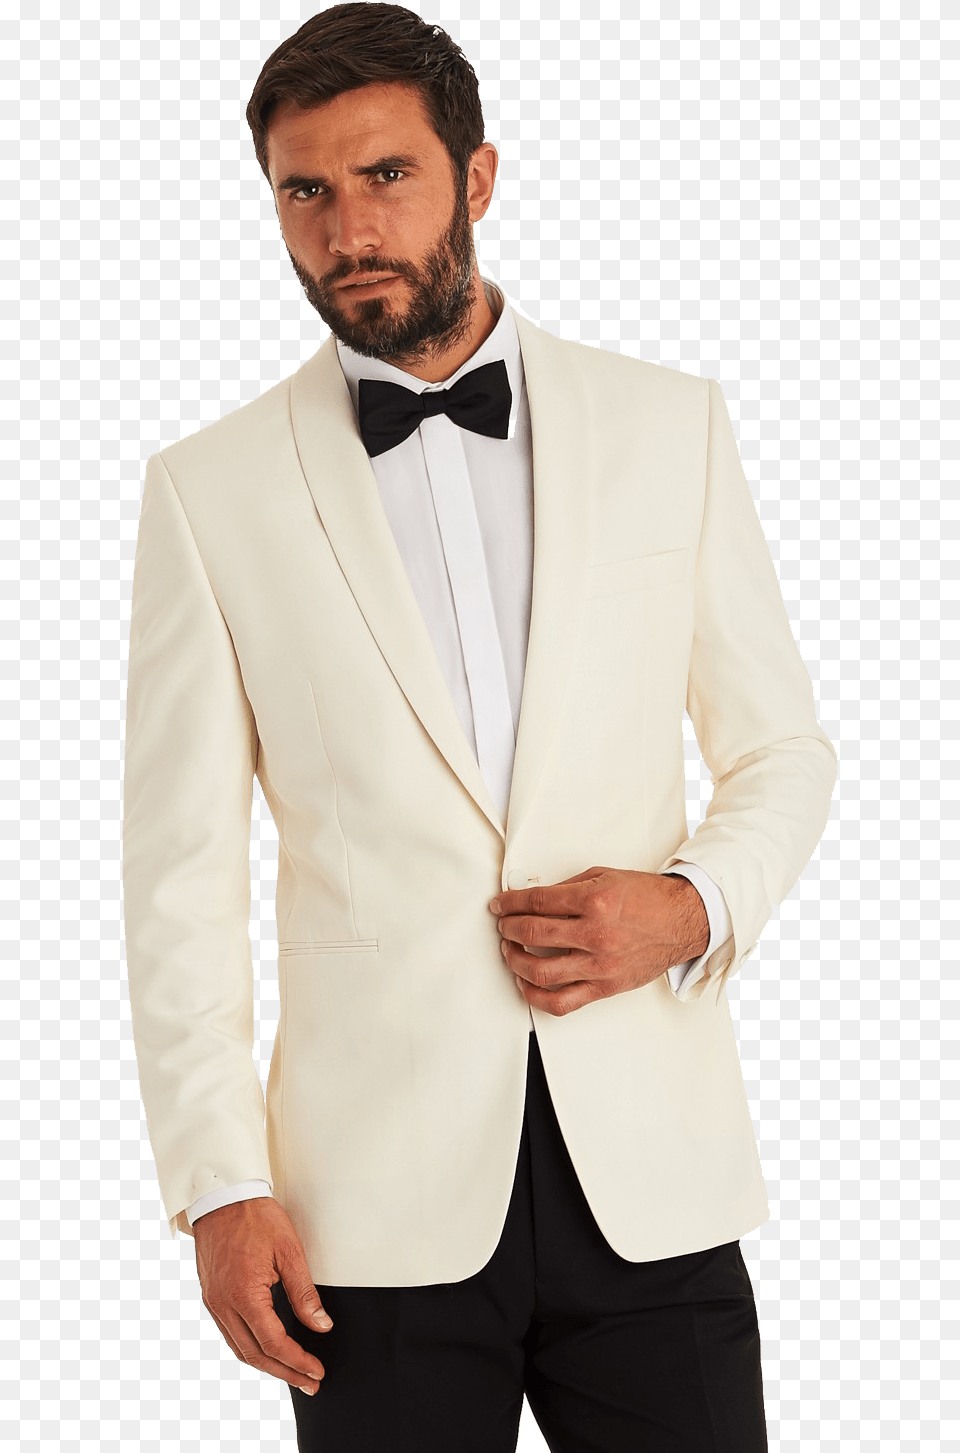 White Tuxedo Image White Suit With Bow Tie, Shirt, Clothing, Formal Wear, Person Png